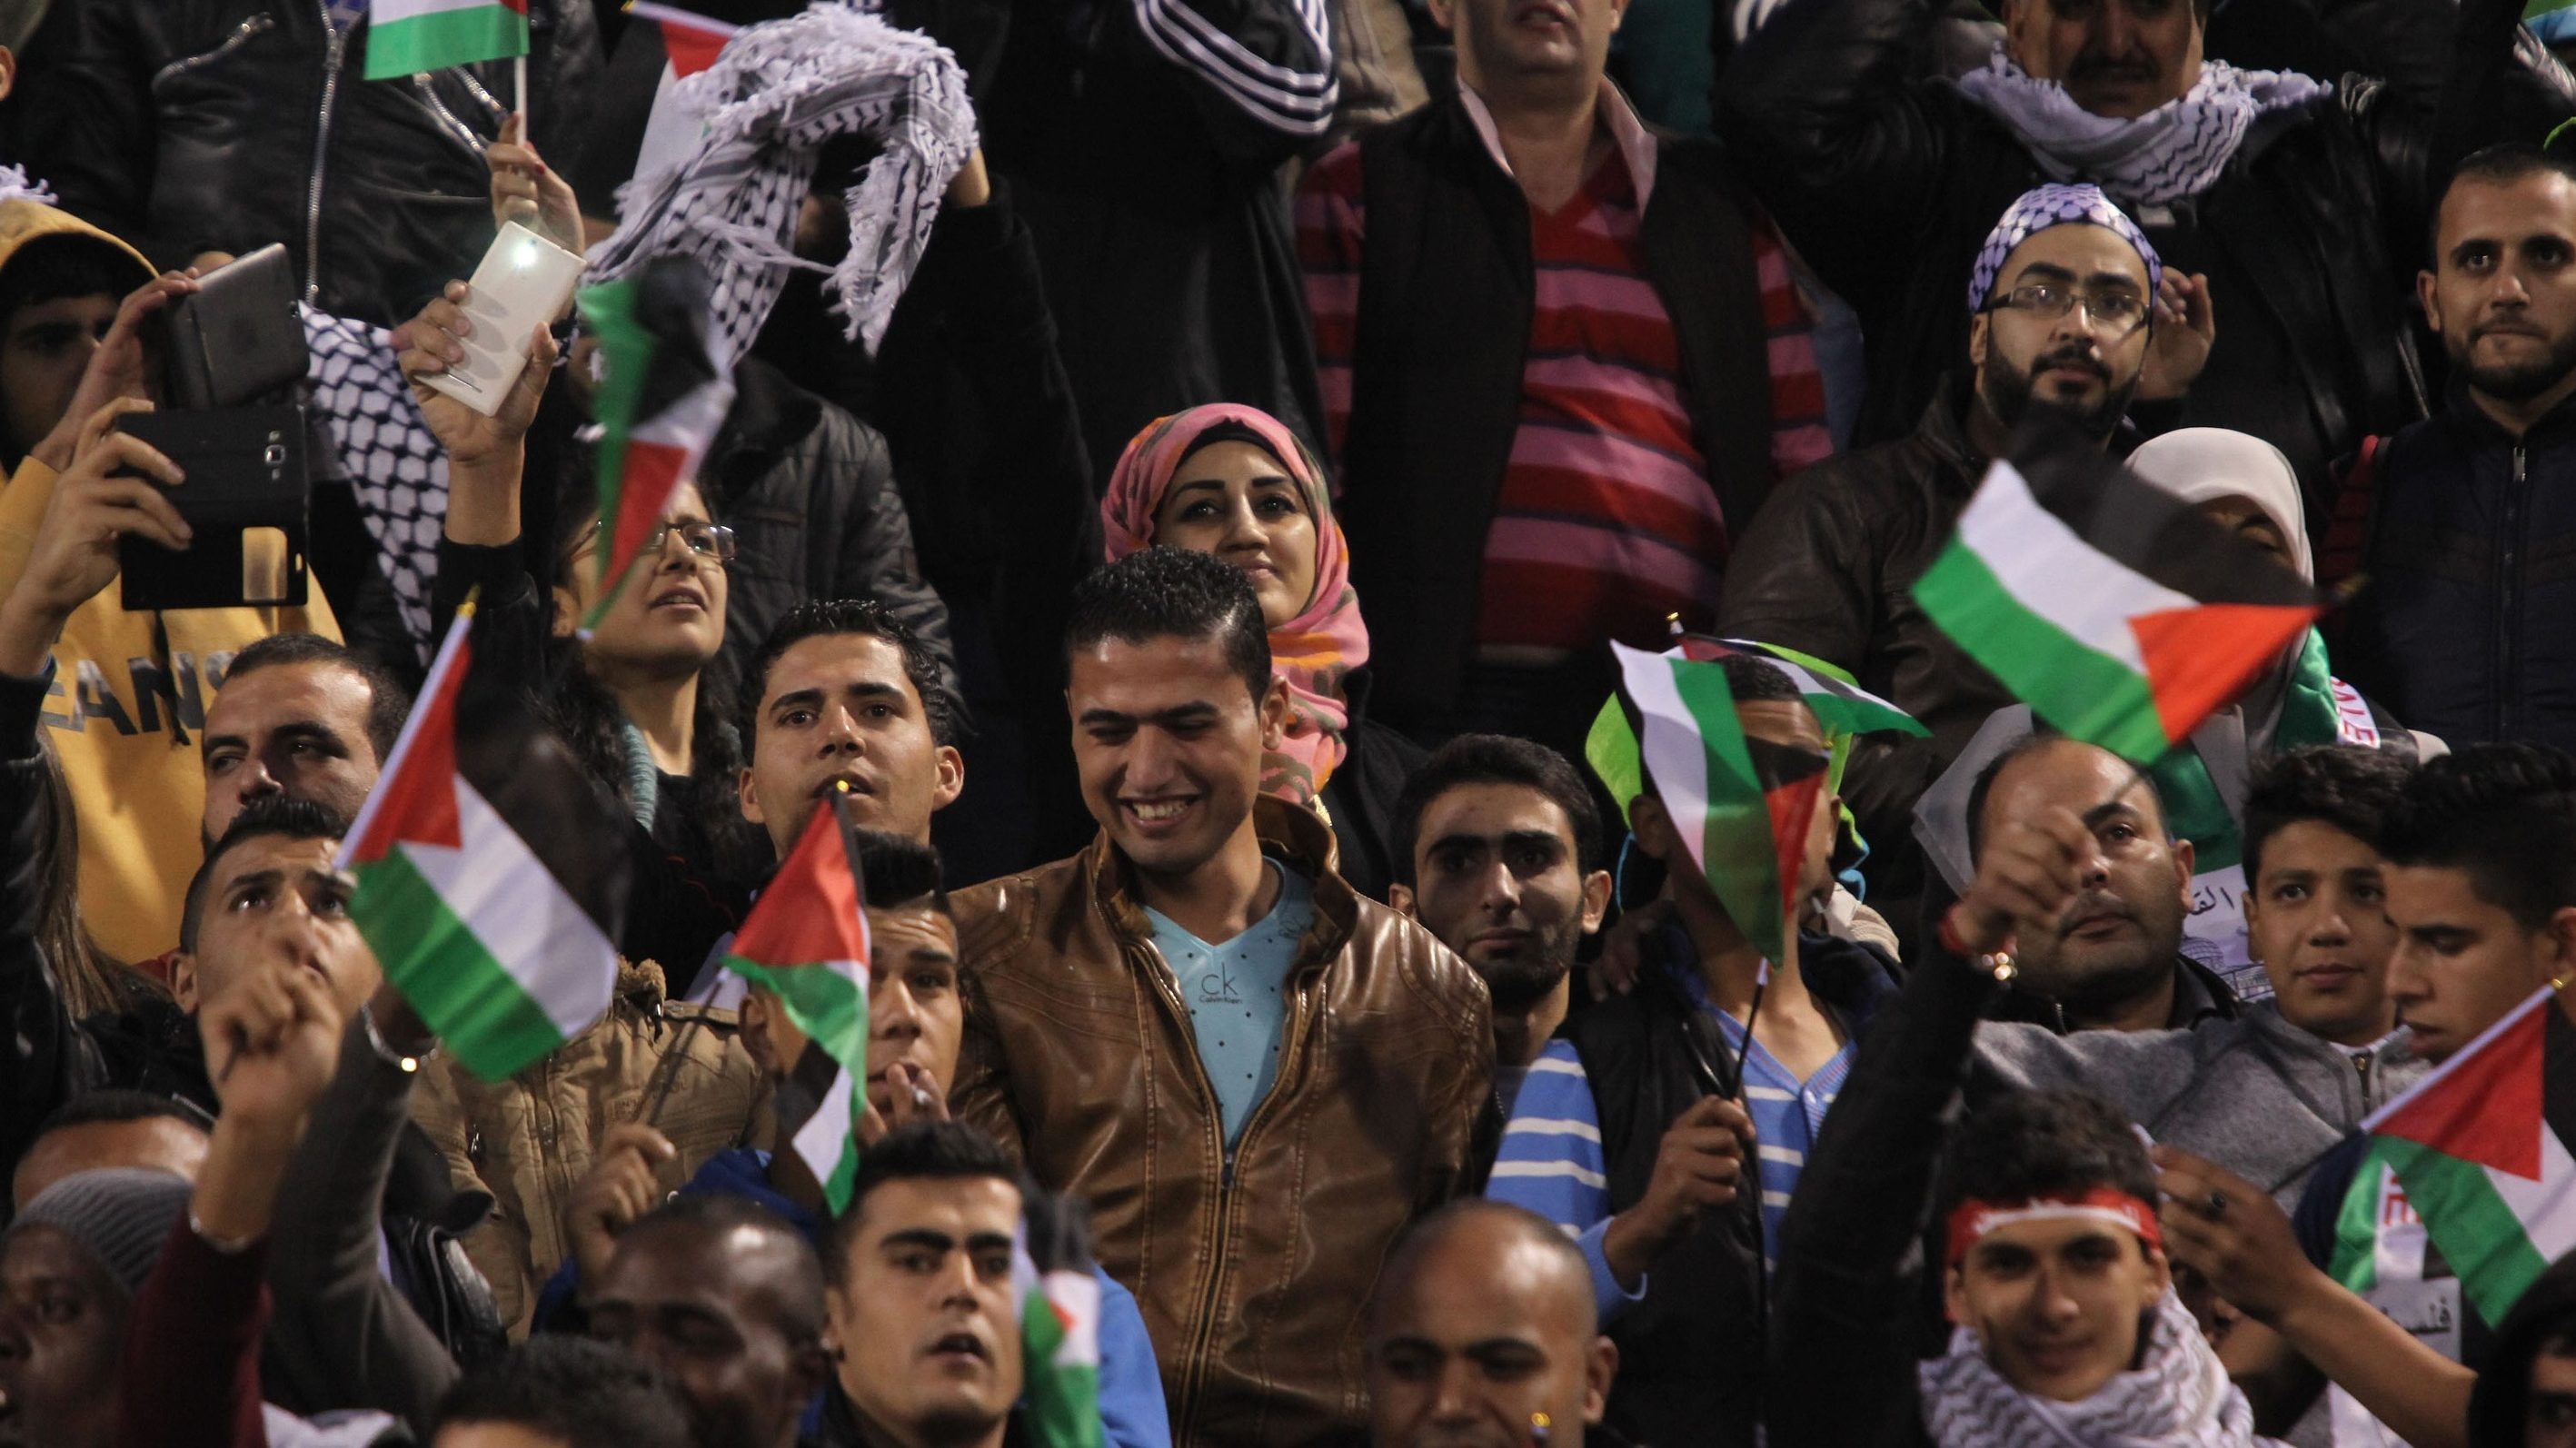 Some Palestinians Seek to Cancel World Cup Qualifier